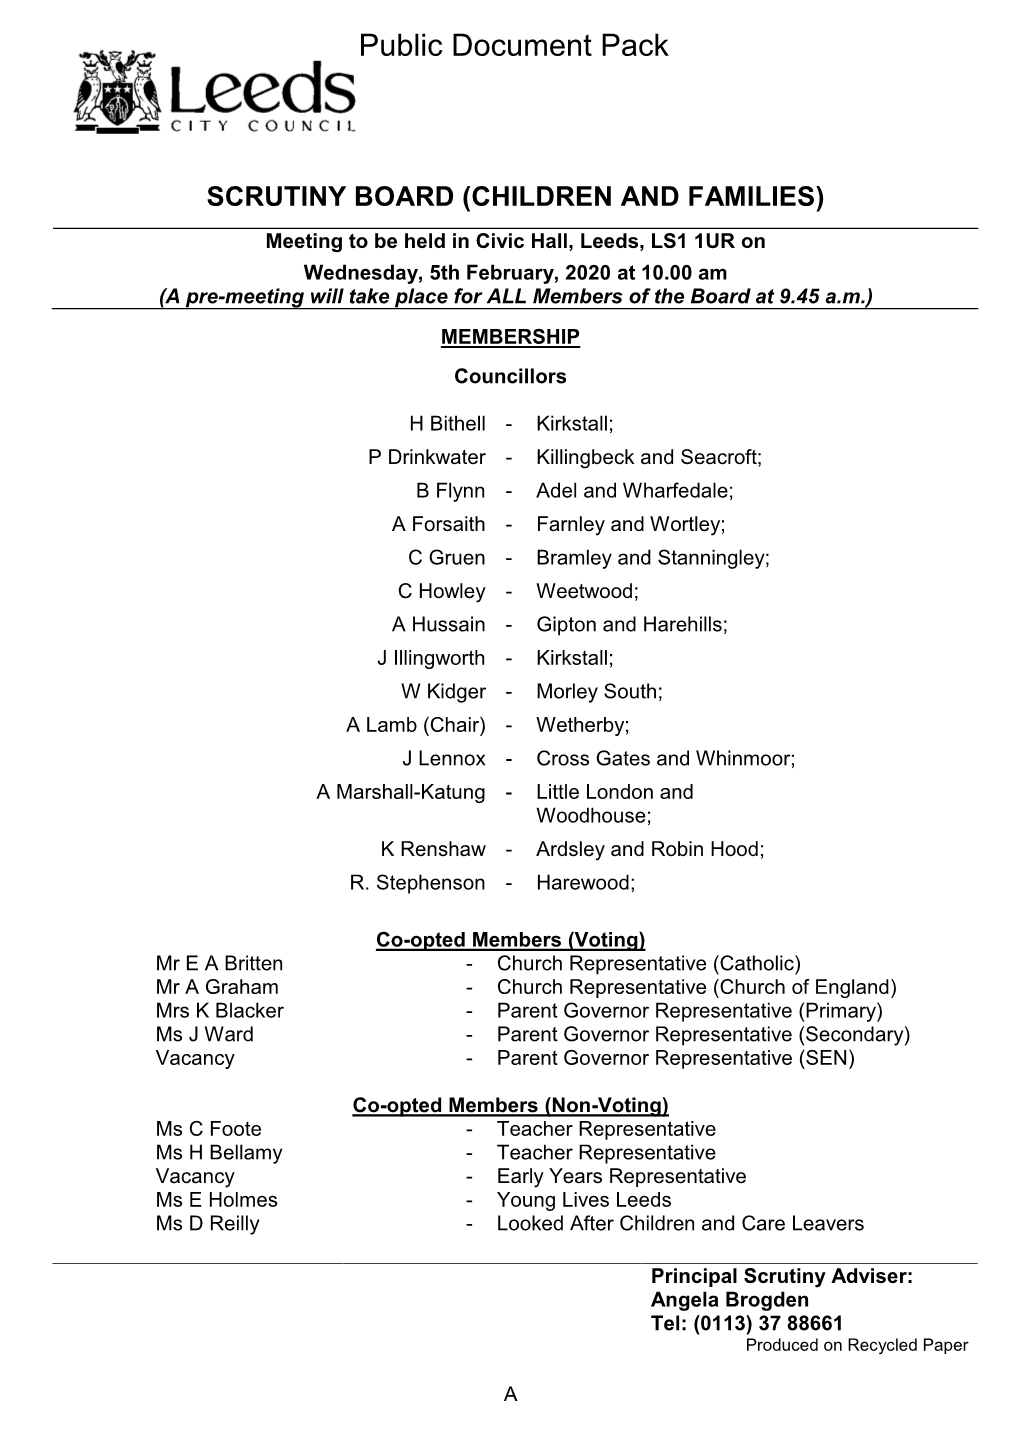 Agenda Document for Scrutiny Board (Children and Families)